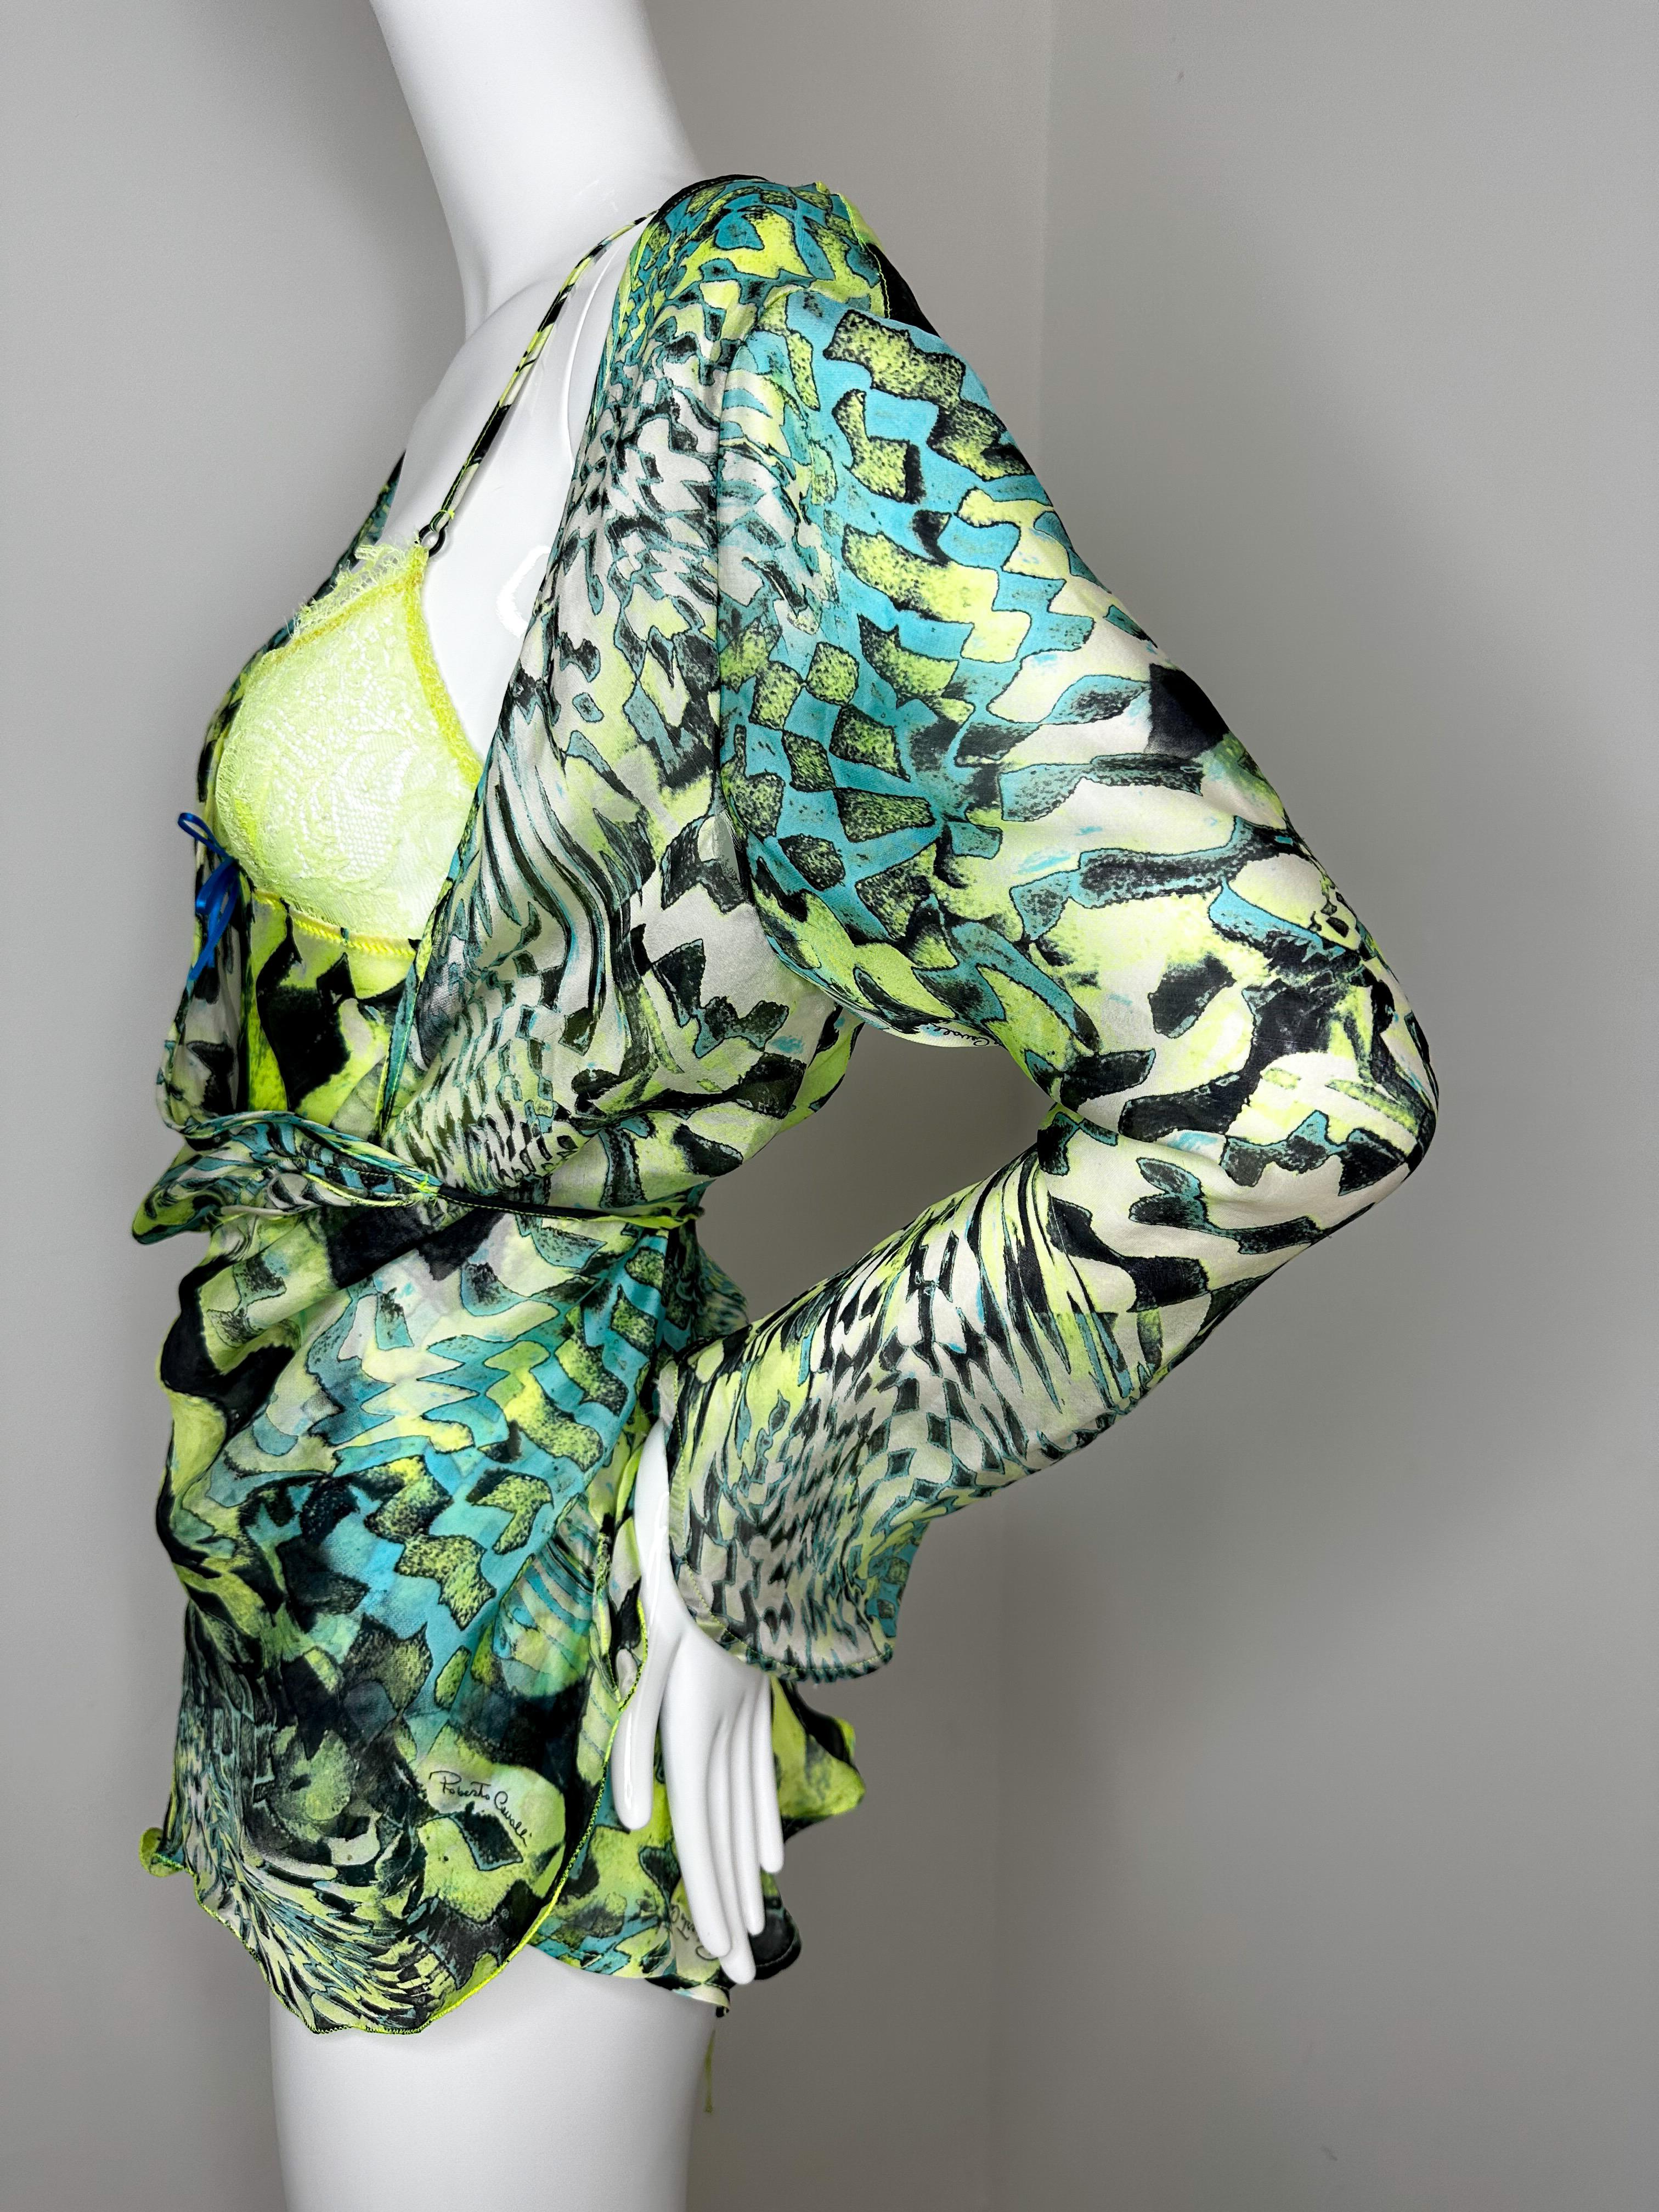 Roberto Cavalli 2003 psychedelic print camisole cardigan set  In Good Condition For Sale In Annandale, VA